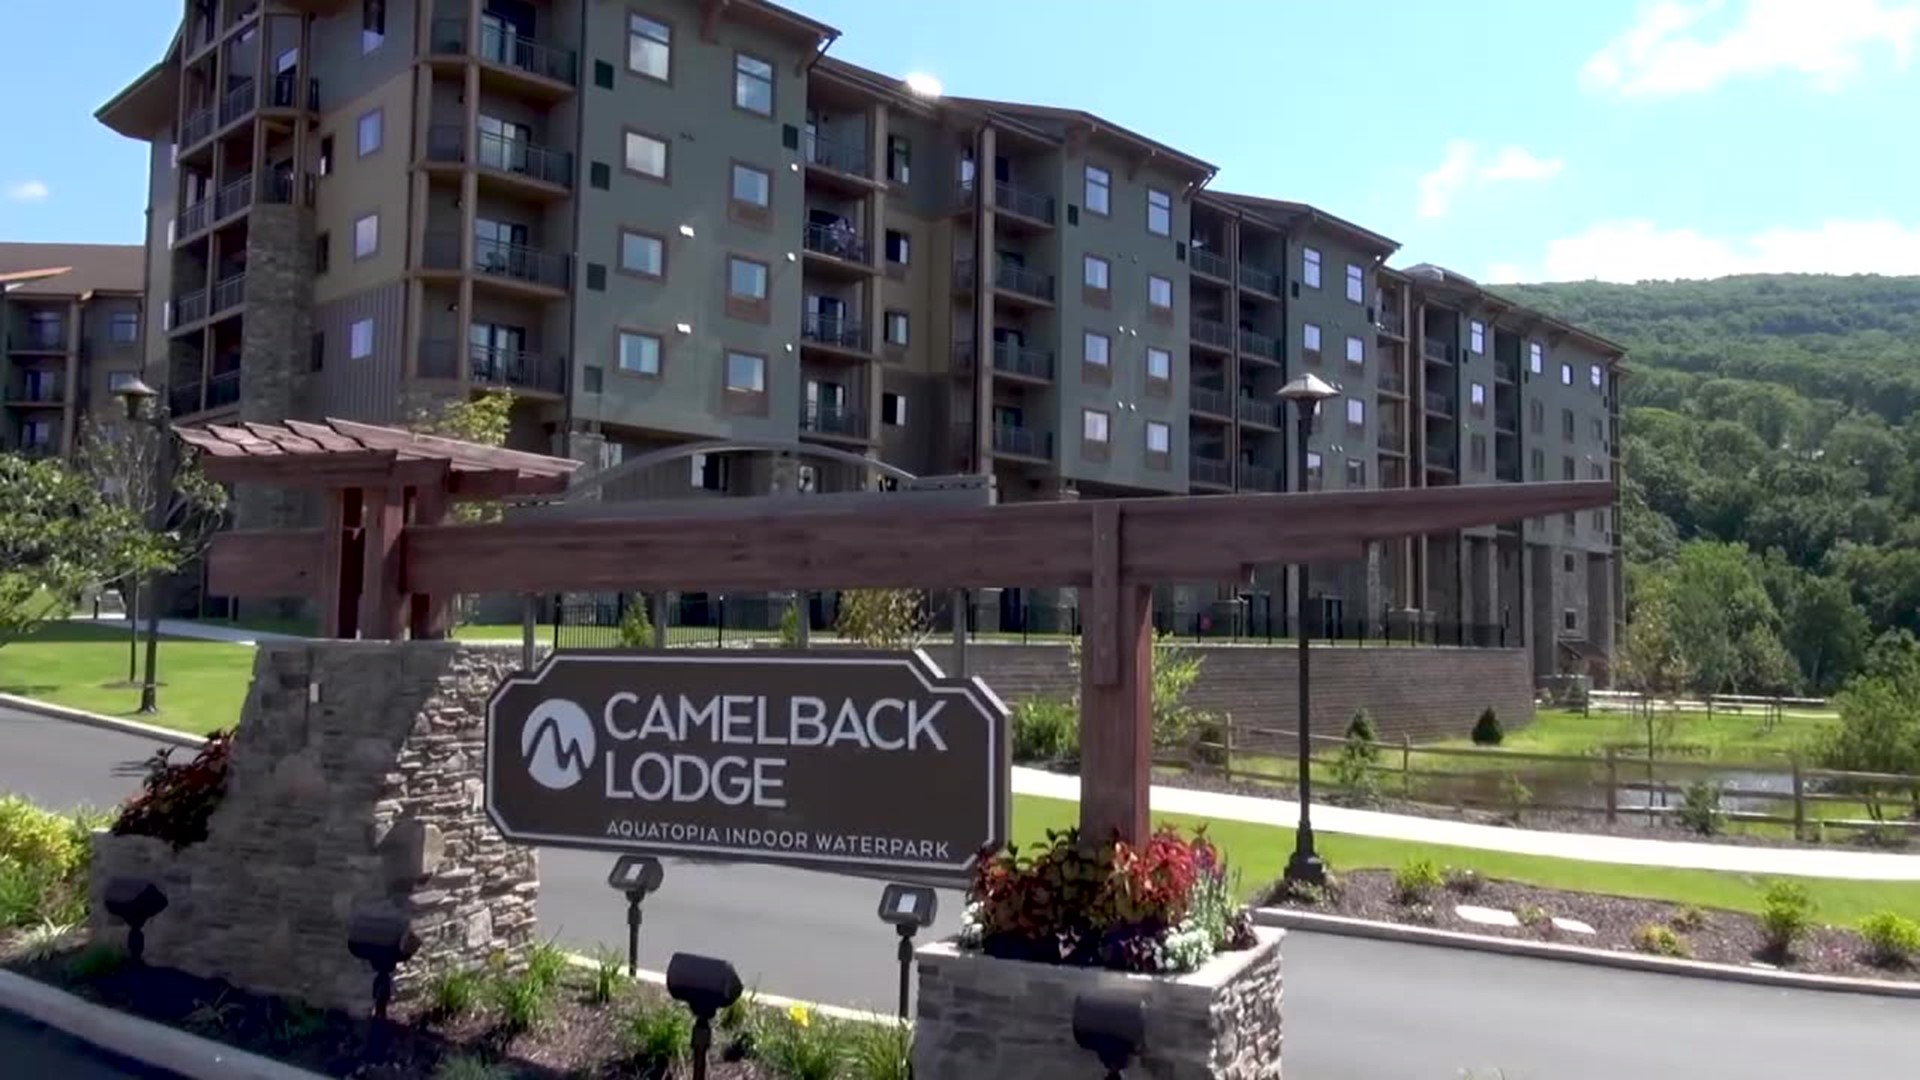 Camelback Mountain Resort near Tannersville is gearing up to reopen more than just its hotel and outdoor adventures.